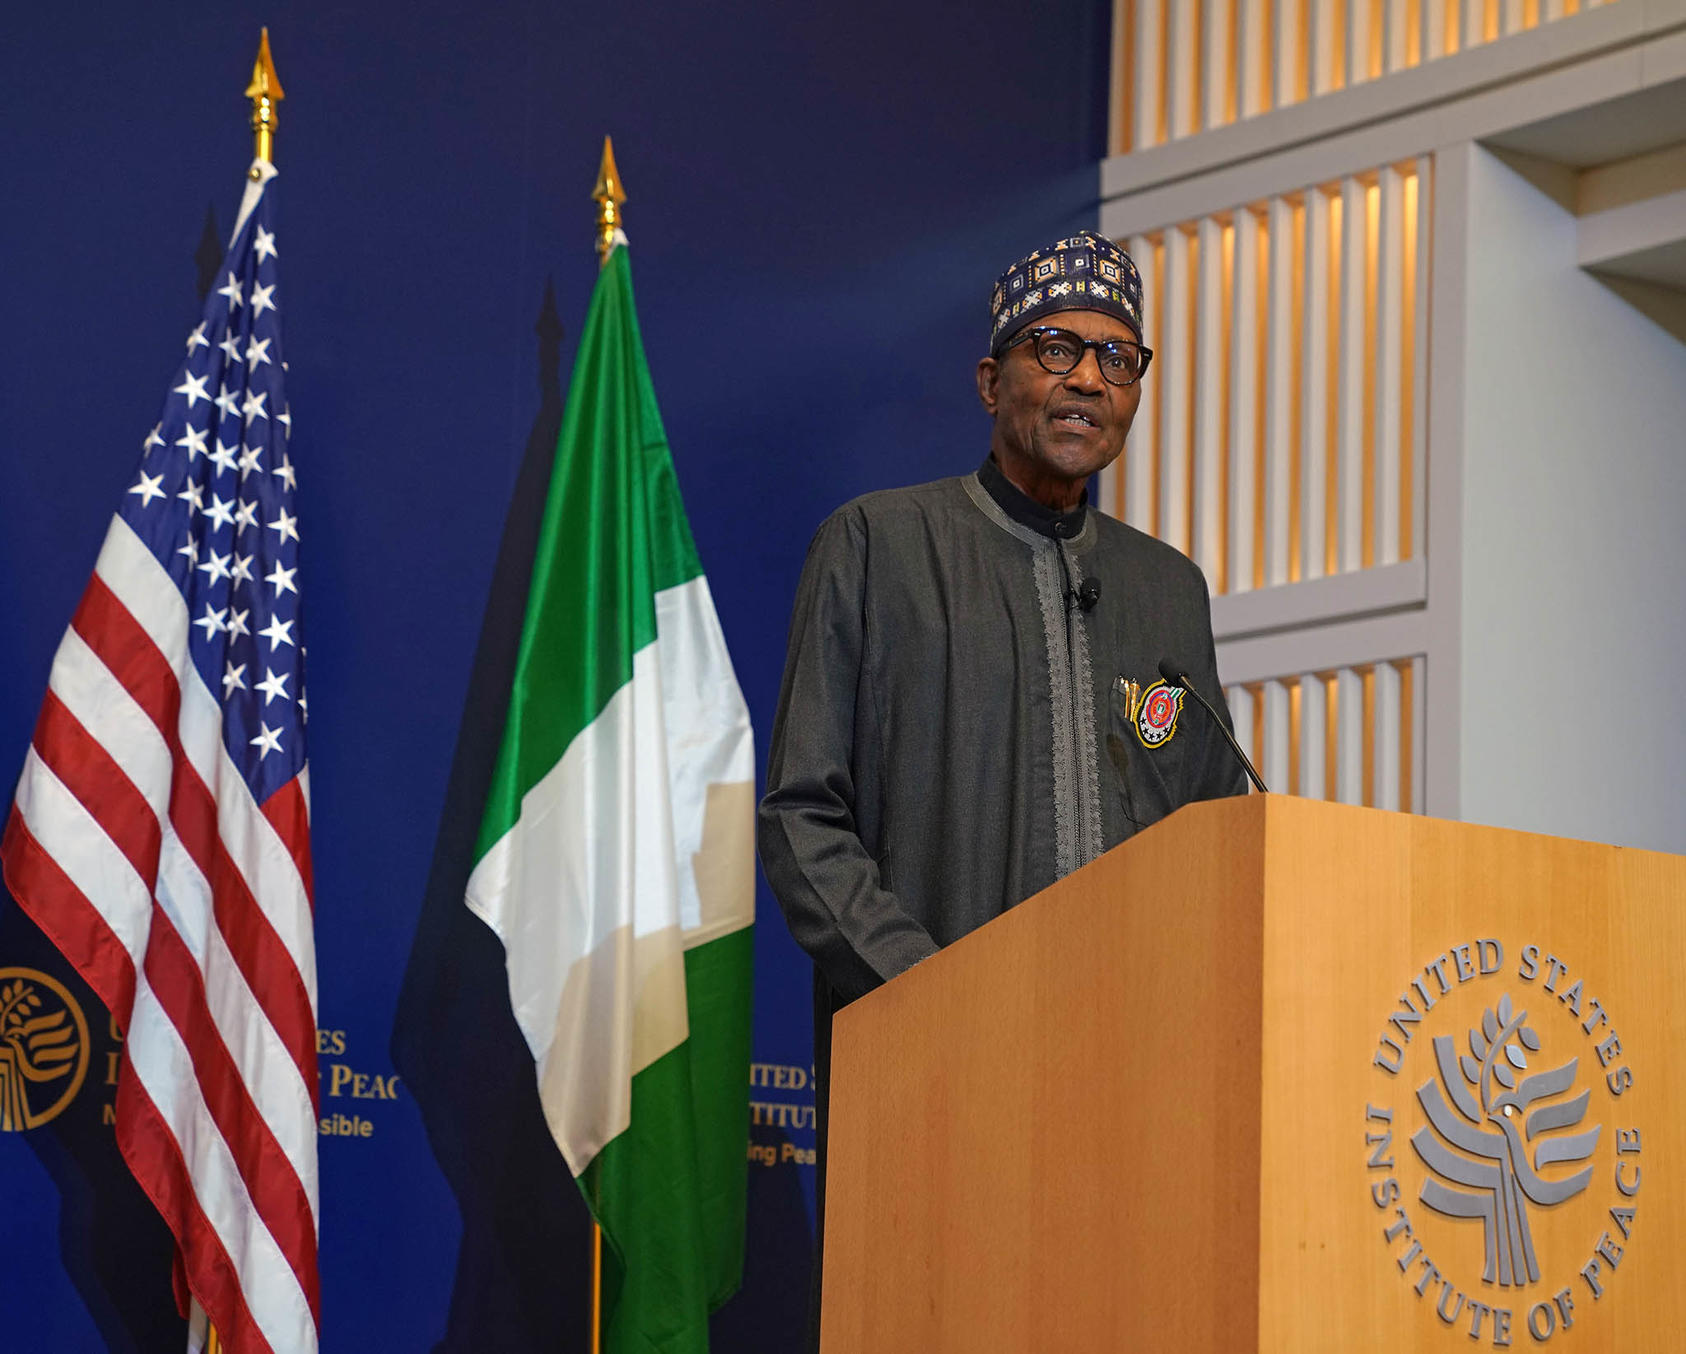 Nigeria’s President Muhammadu Buhari speaks at USIP December 16 after participating in the U.S.-Africa Leaders Summit. He underscored his vow to extend Nigeria’s democratic rule by handing power next year to his elected successor.